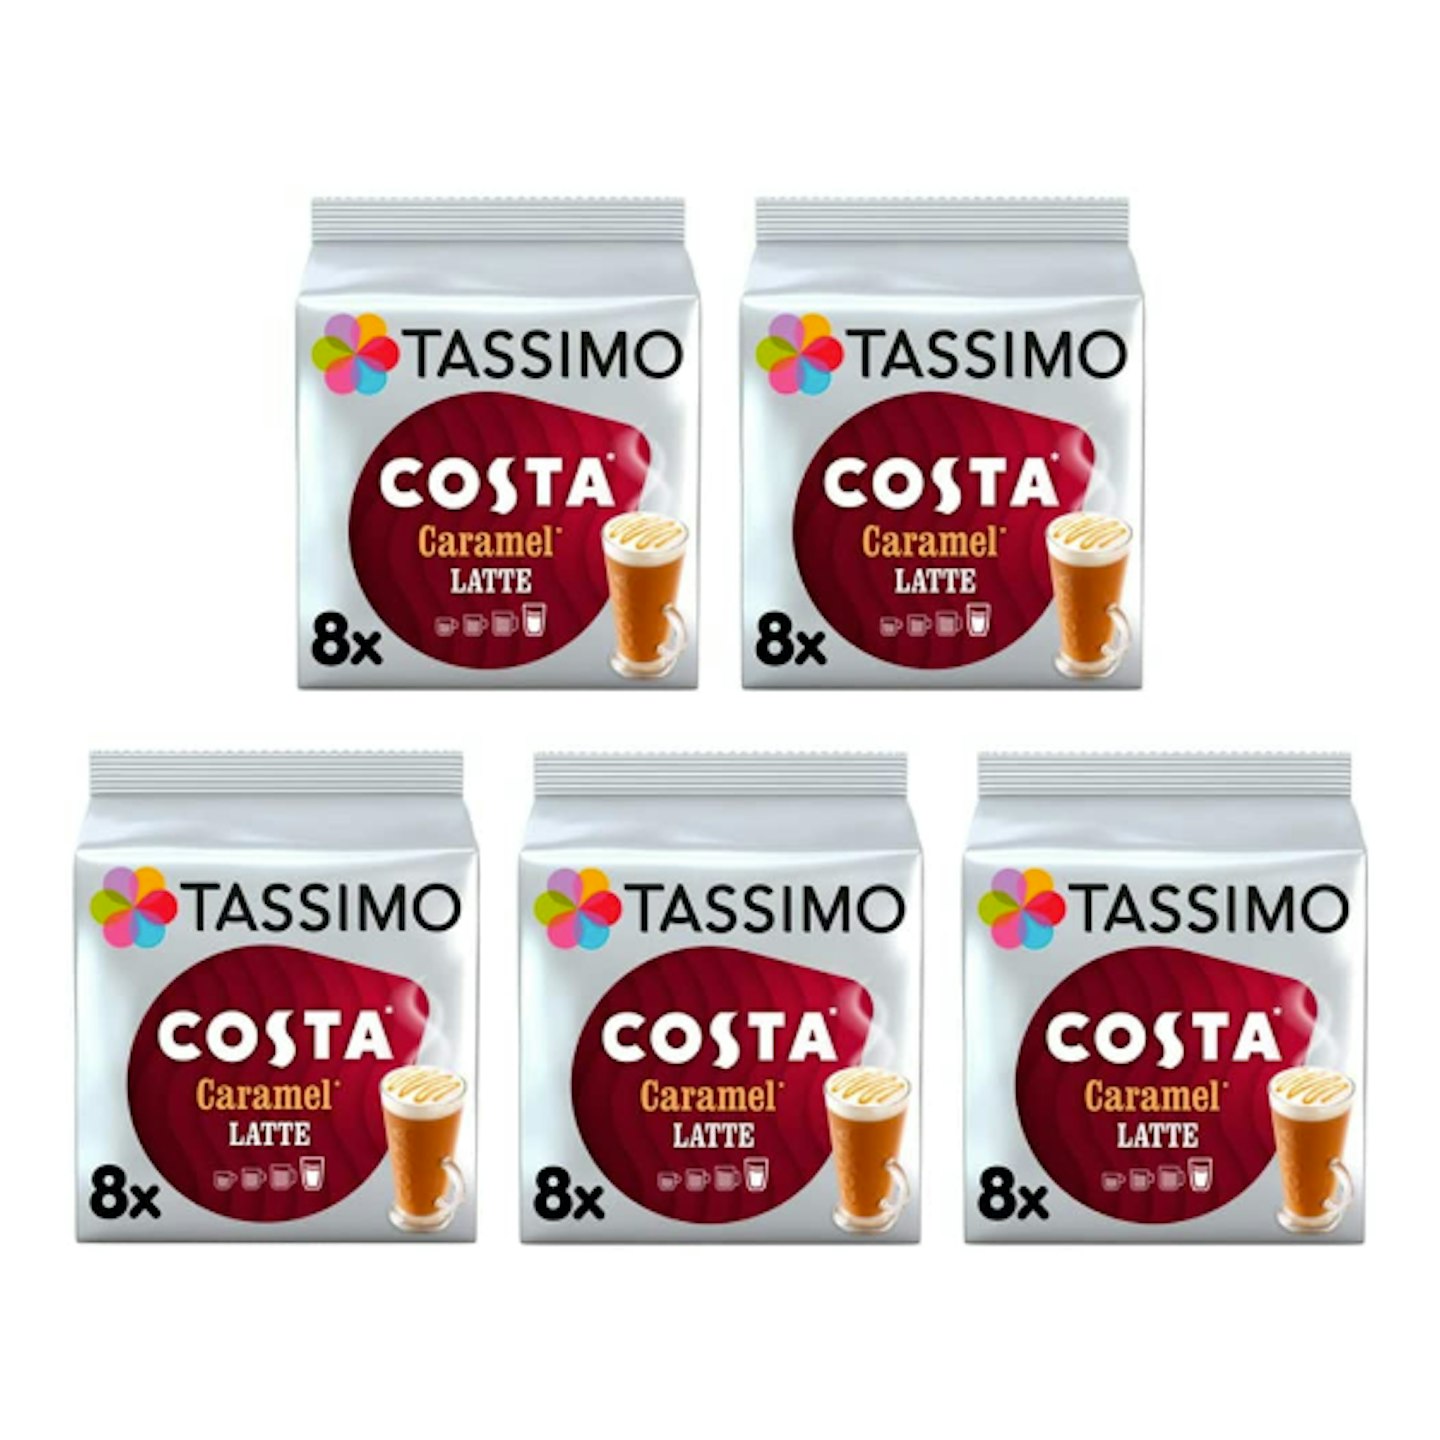 Up to 20% off Tassimo Coffee Pods